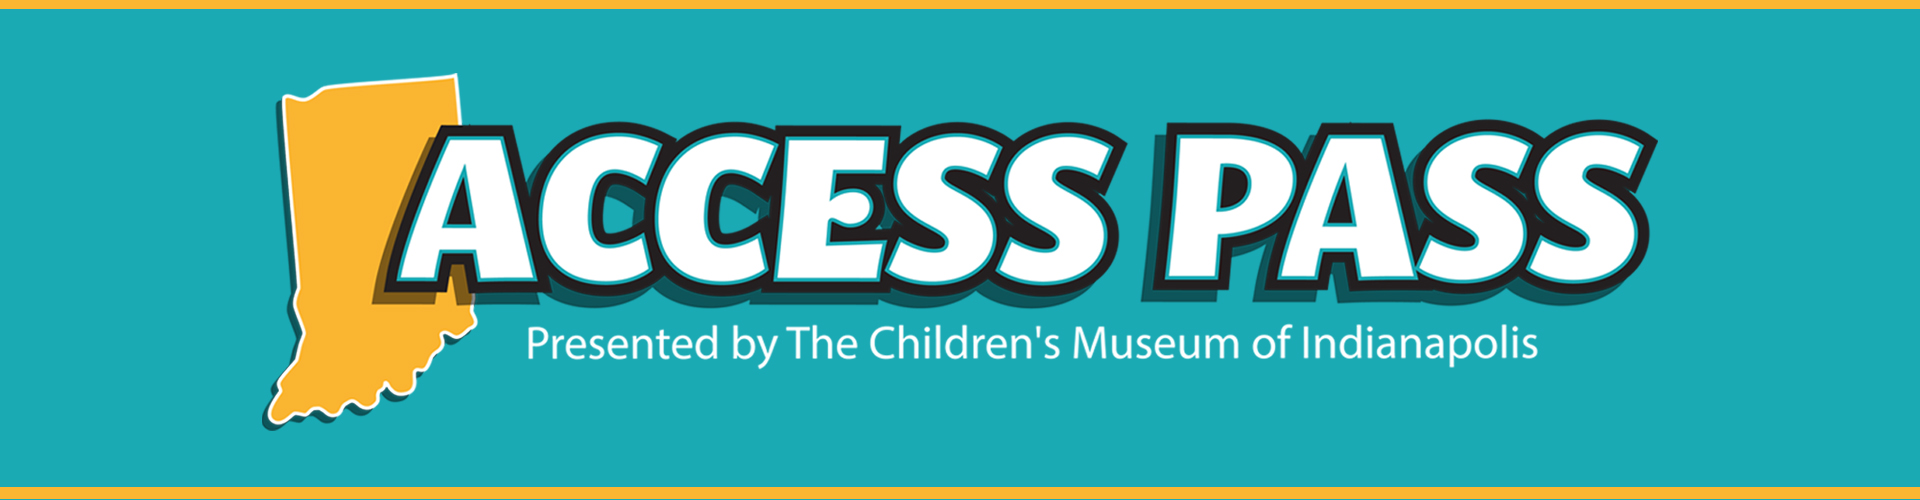 Access Pass presented by The Children's Museum of Indianapolis and Geico Philanthropic Foundation, supported by Anthem